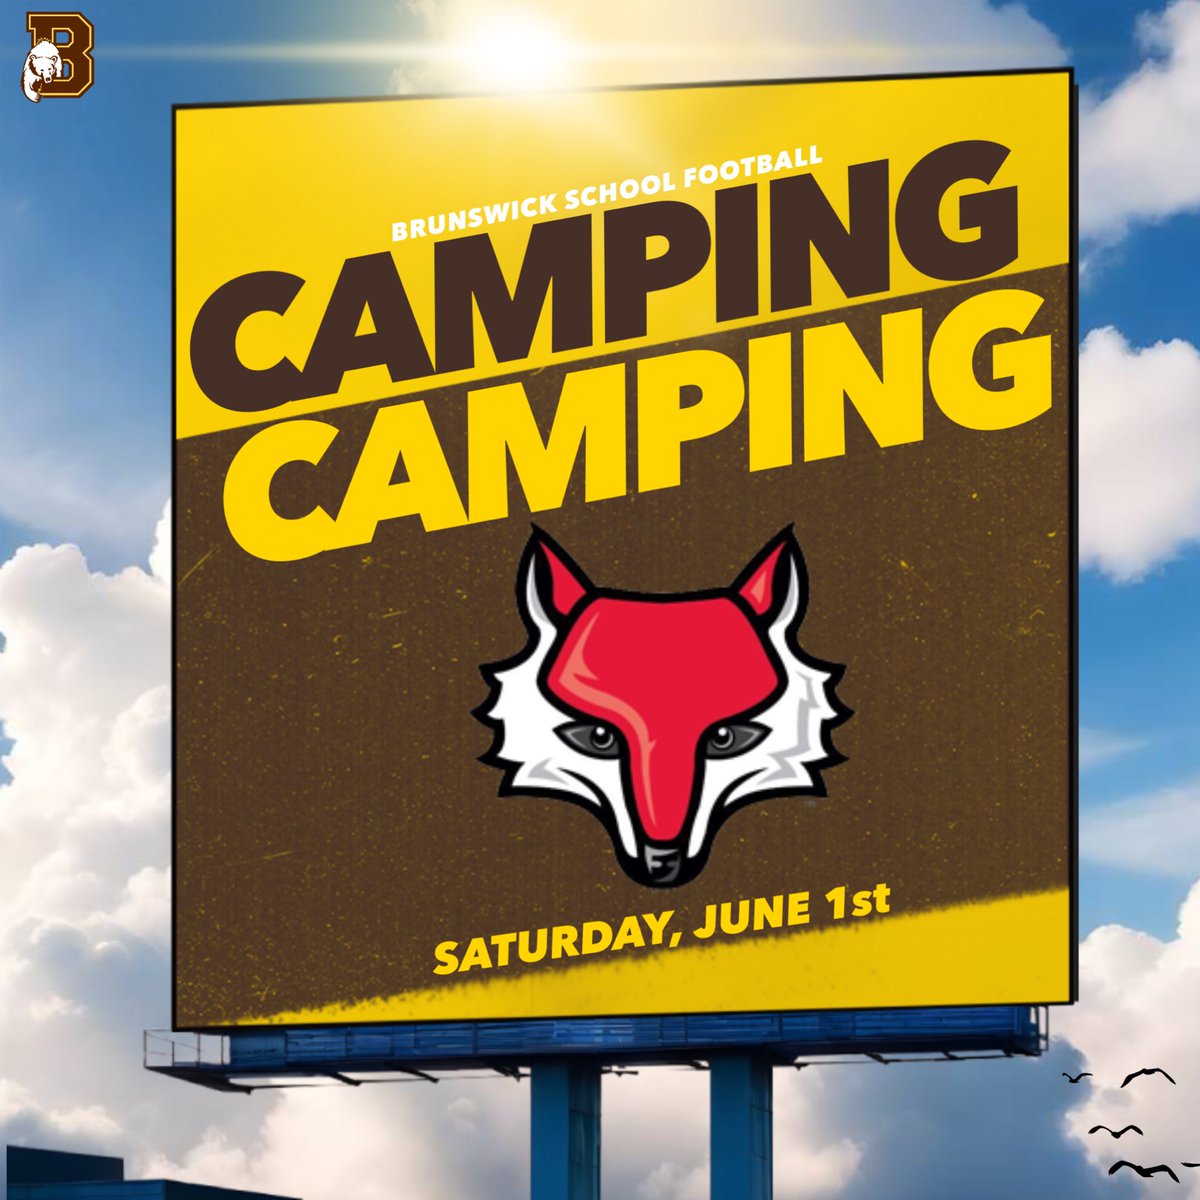 ⛺️ BRUINS GONE CAMPING ⛺️

Coaches at Marist Exposure Camp tomorrow, be on the lookout for a few @Wick_Football_ players that will in attendance!

AM session 
‘27 WR - @noah_park1

PM session
‘25 ATH - @NoisetteJaylen (walk up)
‘26 OL - @owenswen75
‘26 OL - @SeanBern424 (walk up)